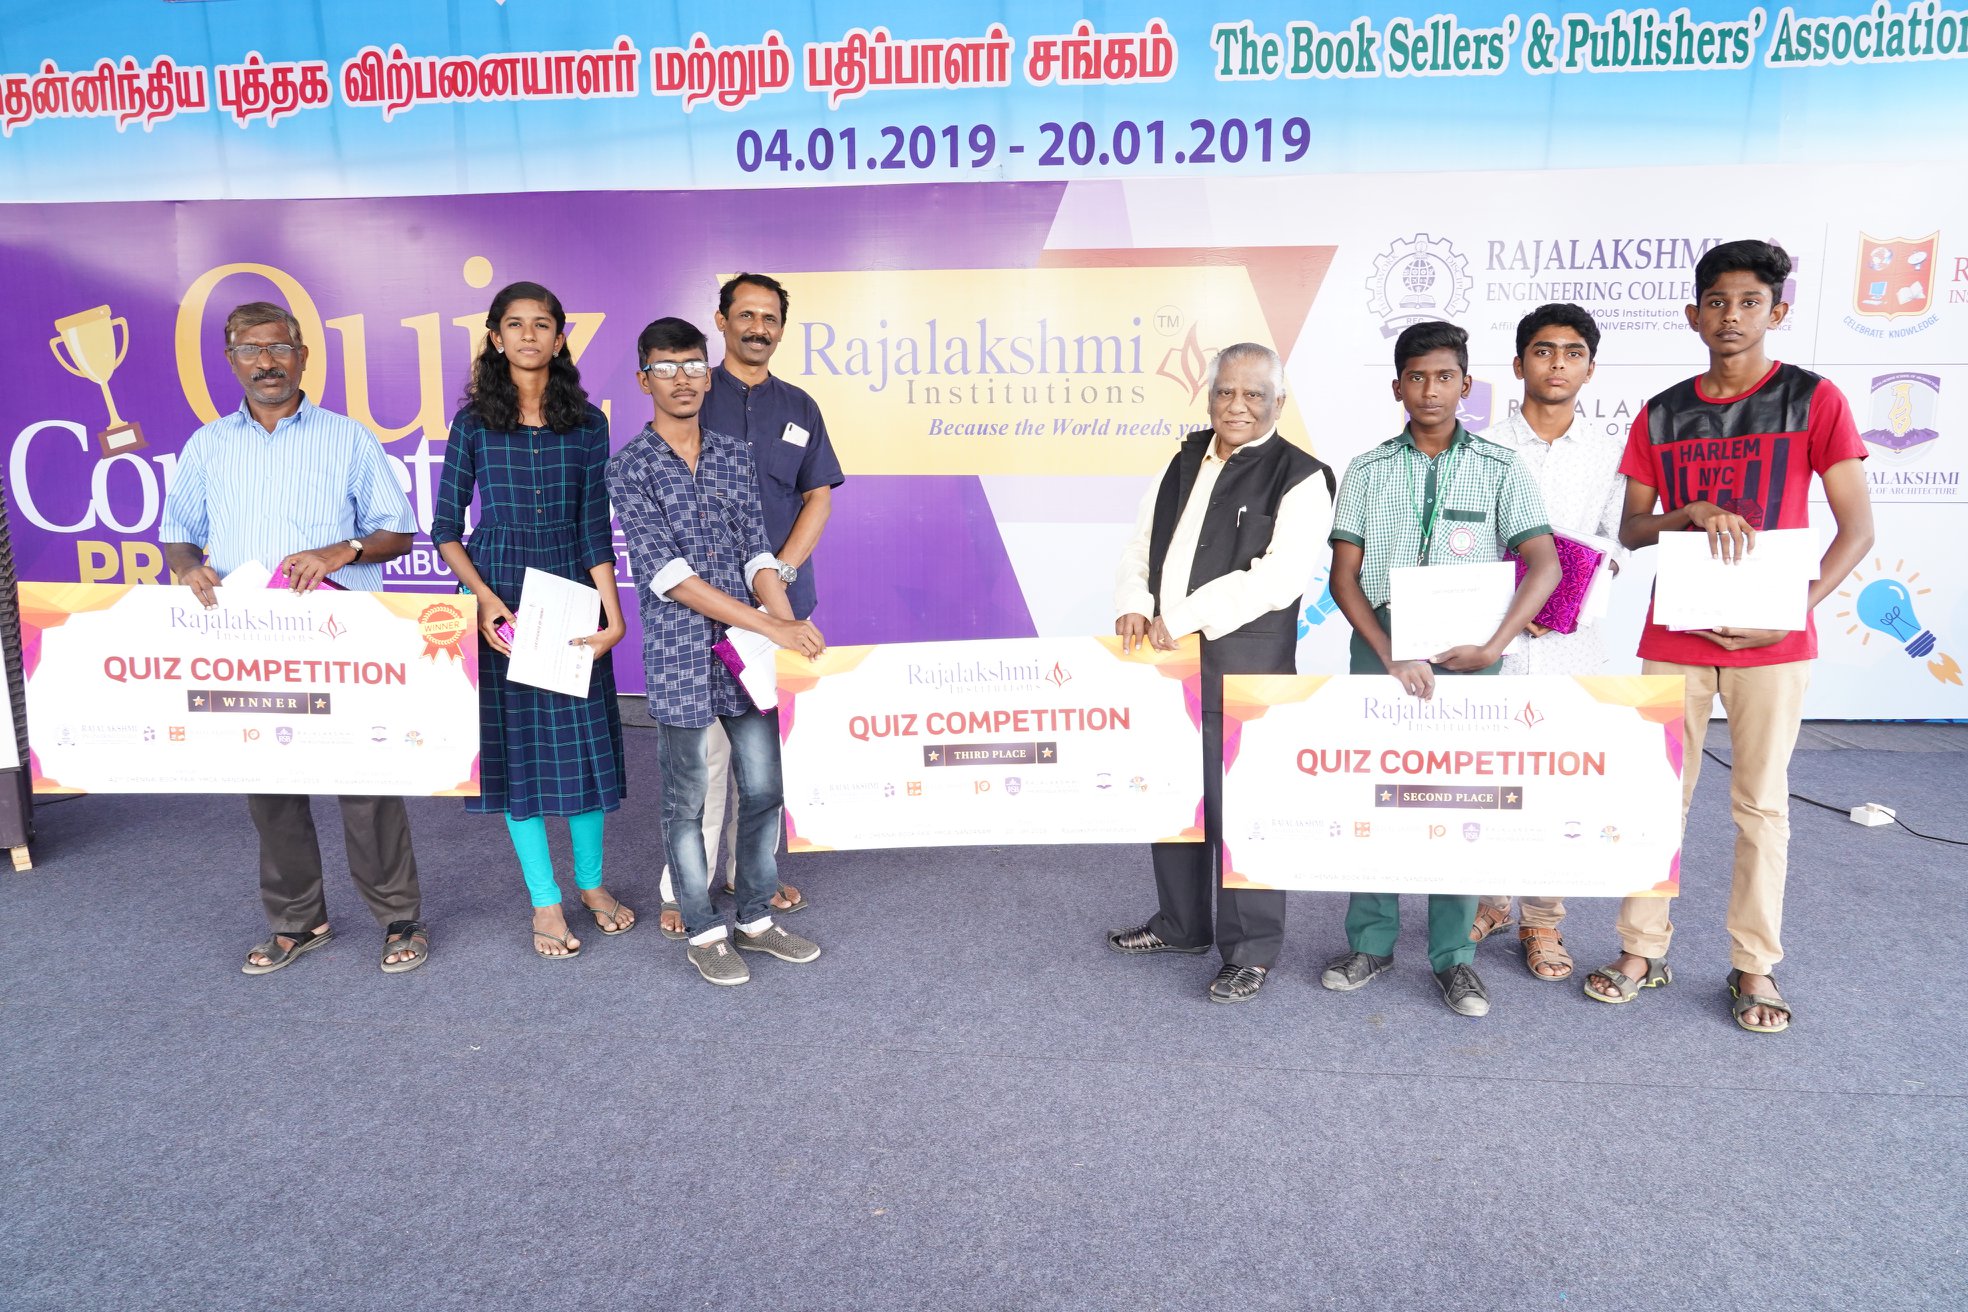 Prize distribution for the Quiz Competition